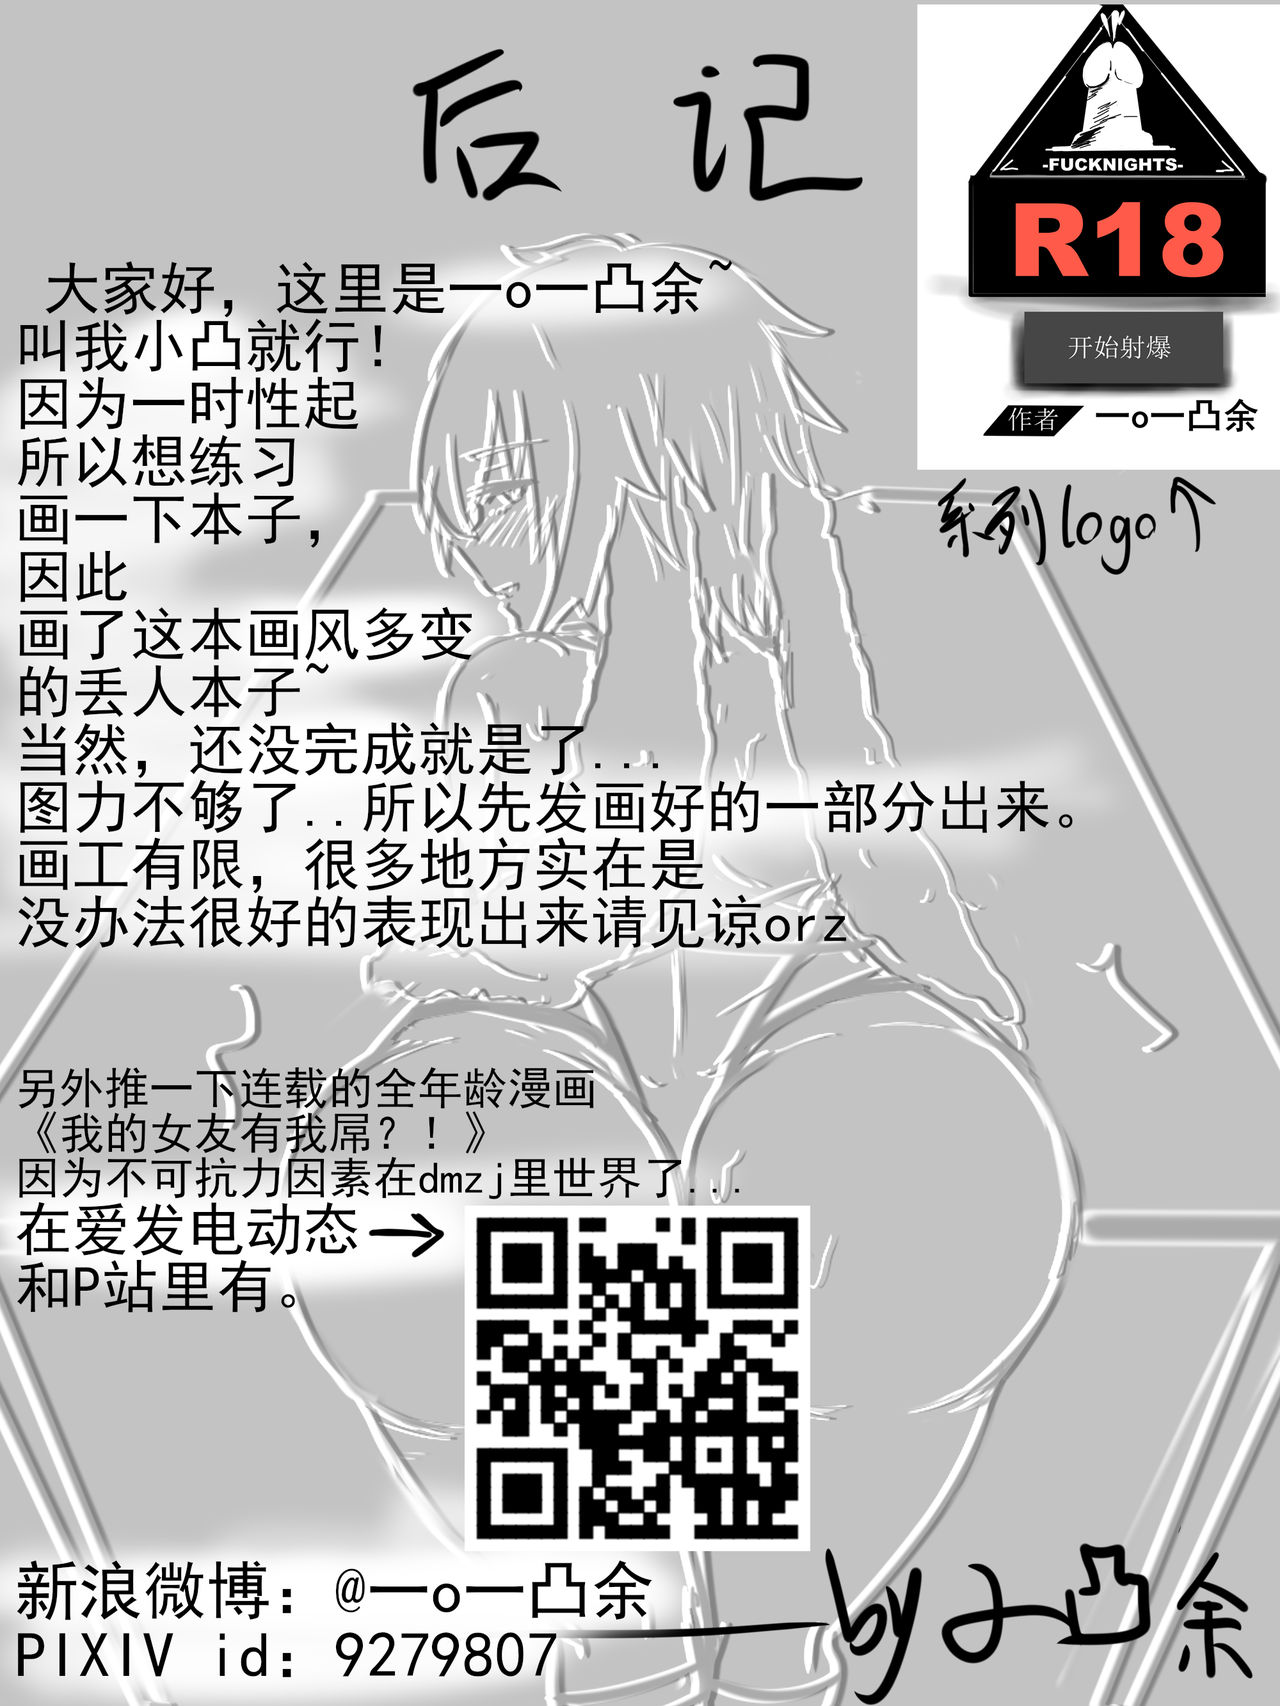 Special services of Ansel 安赛尔的特别服务1+2